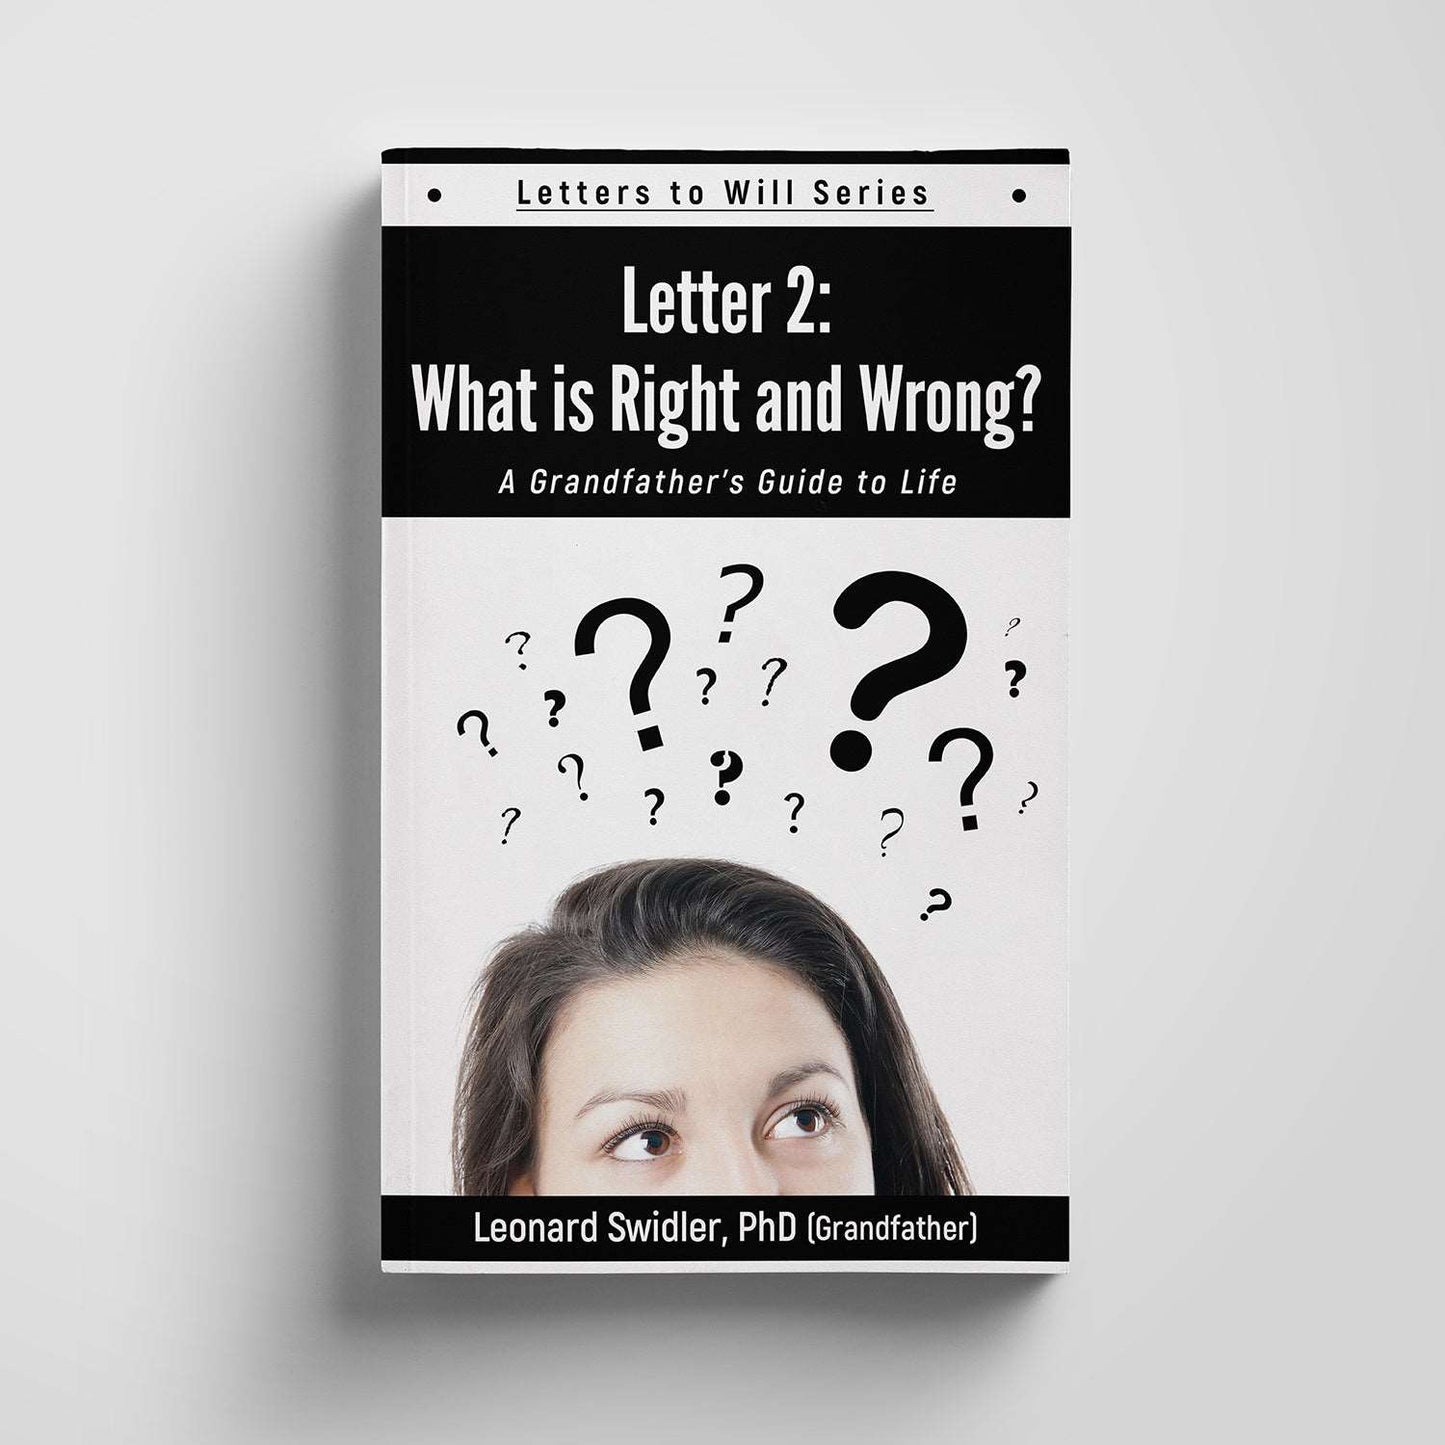 Letter 2: Letters to Will: What Is Right and Wrong?